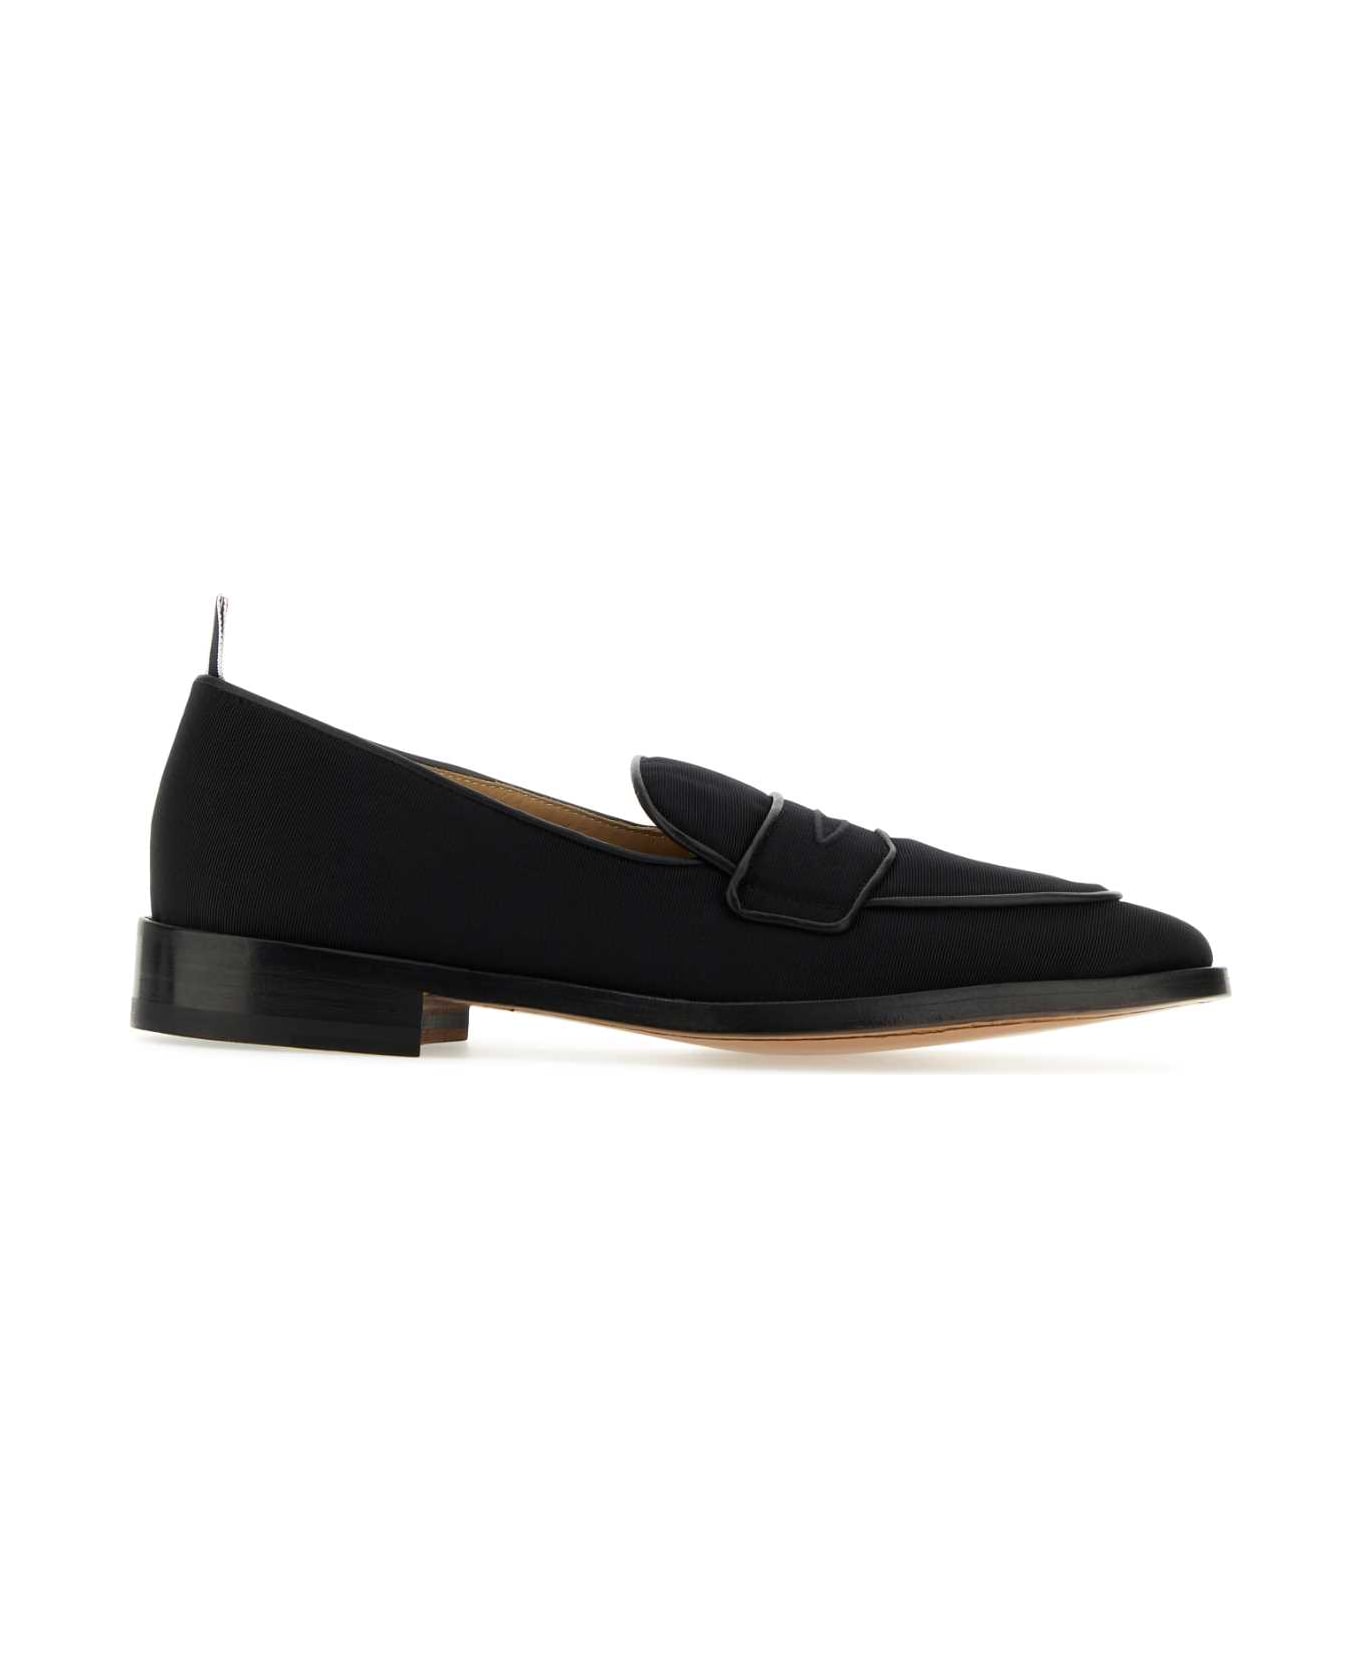 Thom Browne Midnight Blue Fabric Loafers - Black